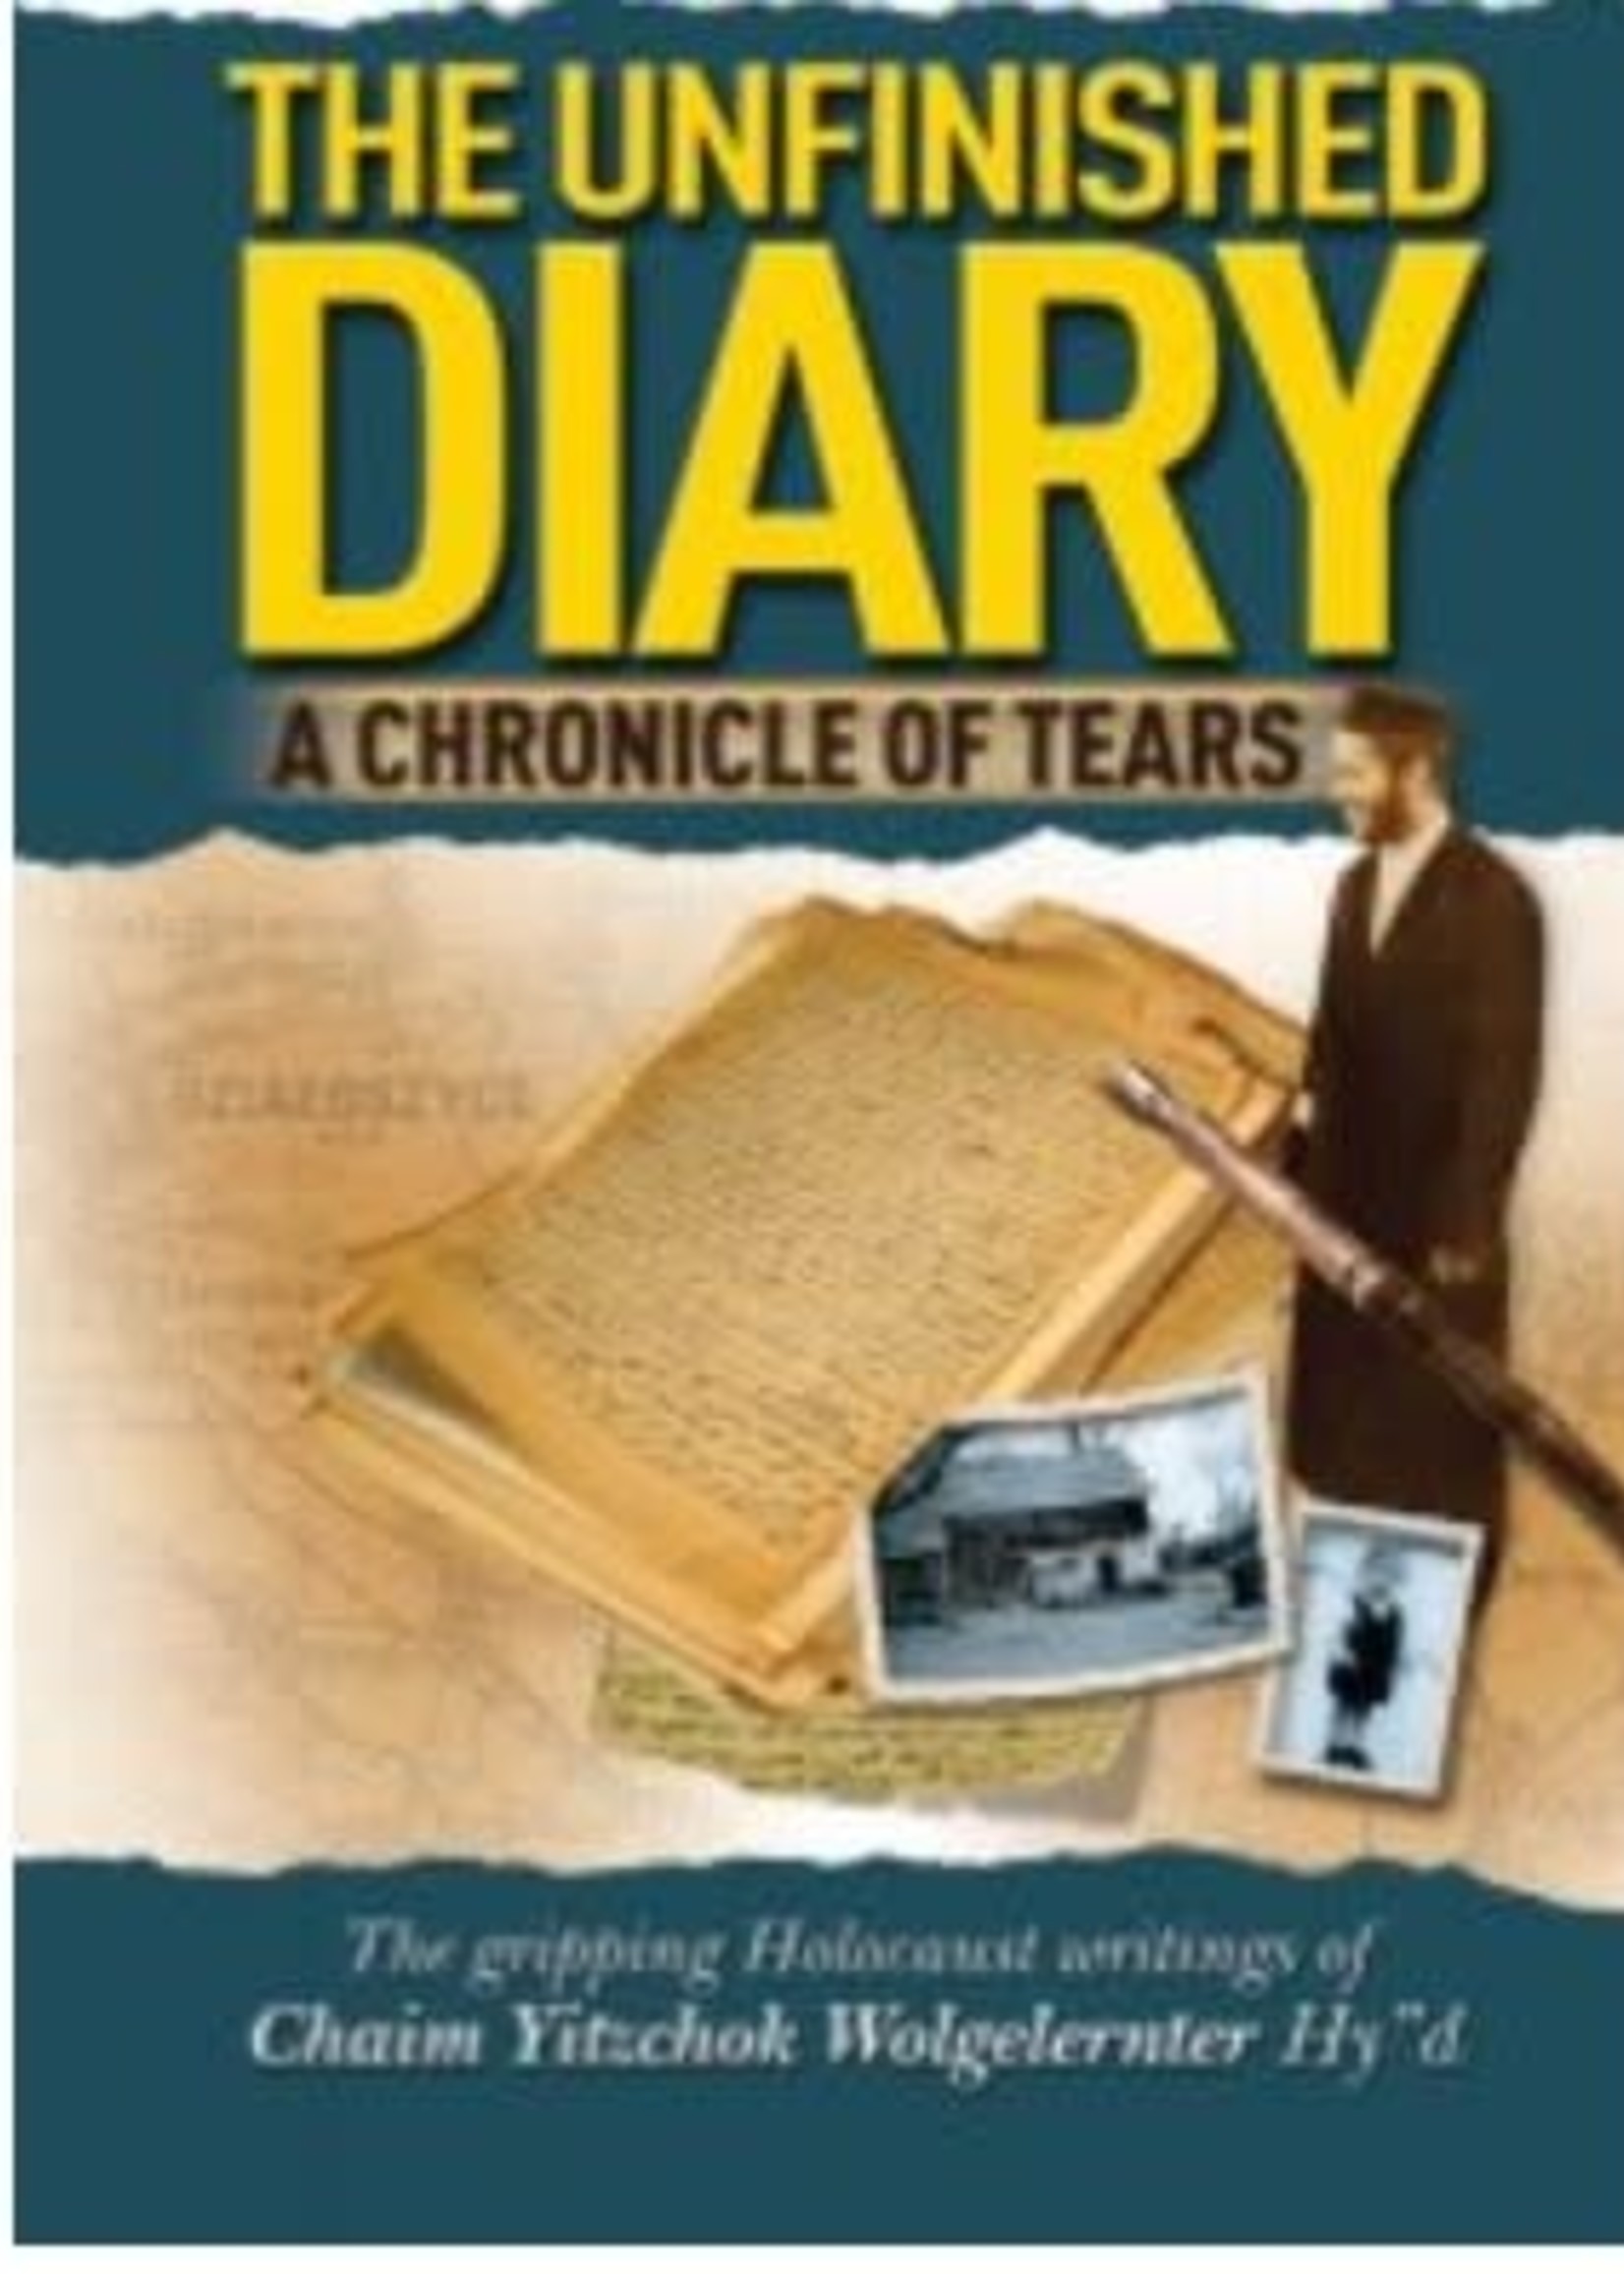 Rabbi Chaim Yitzchak Wolgelernter The Unfinished Diary-  The Gripping Holocaust Writings of Chaim Yitzchak Wolgelernter